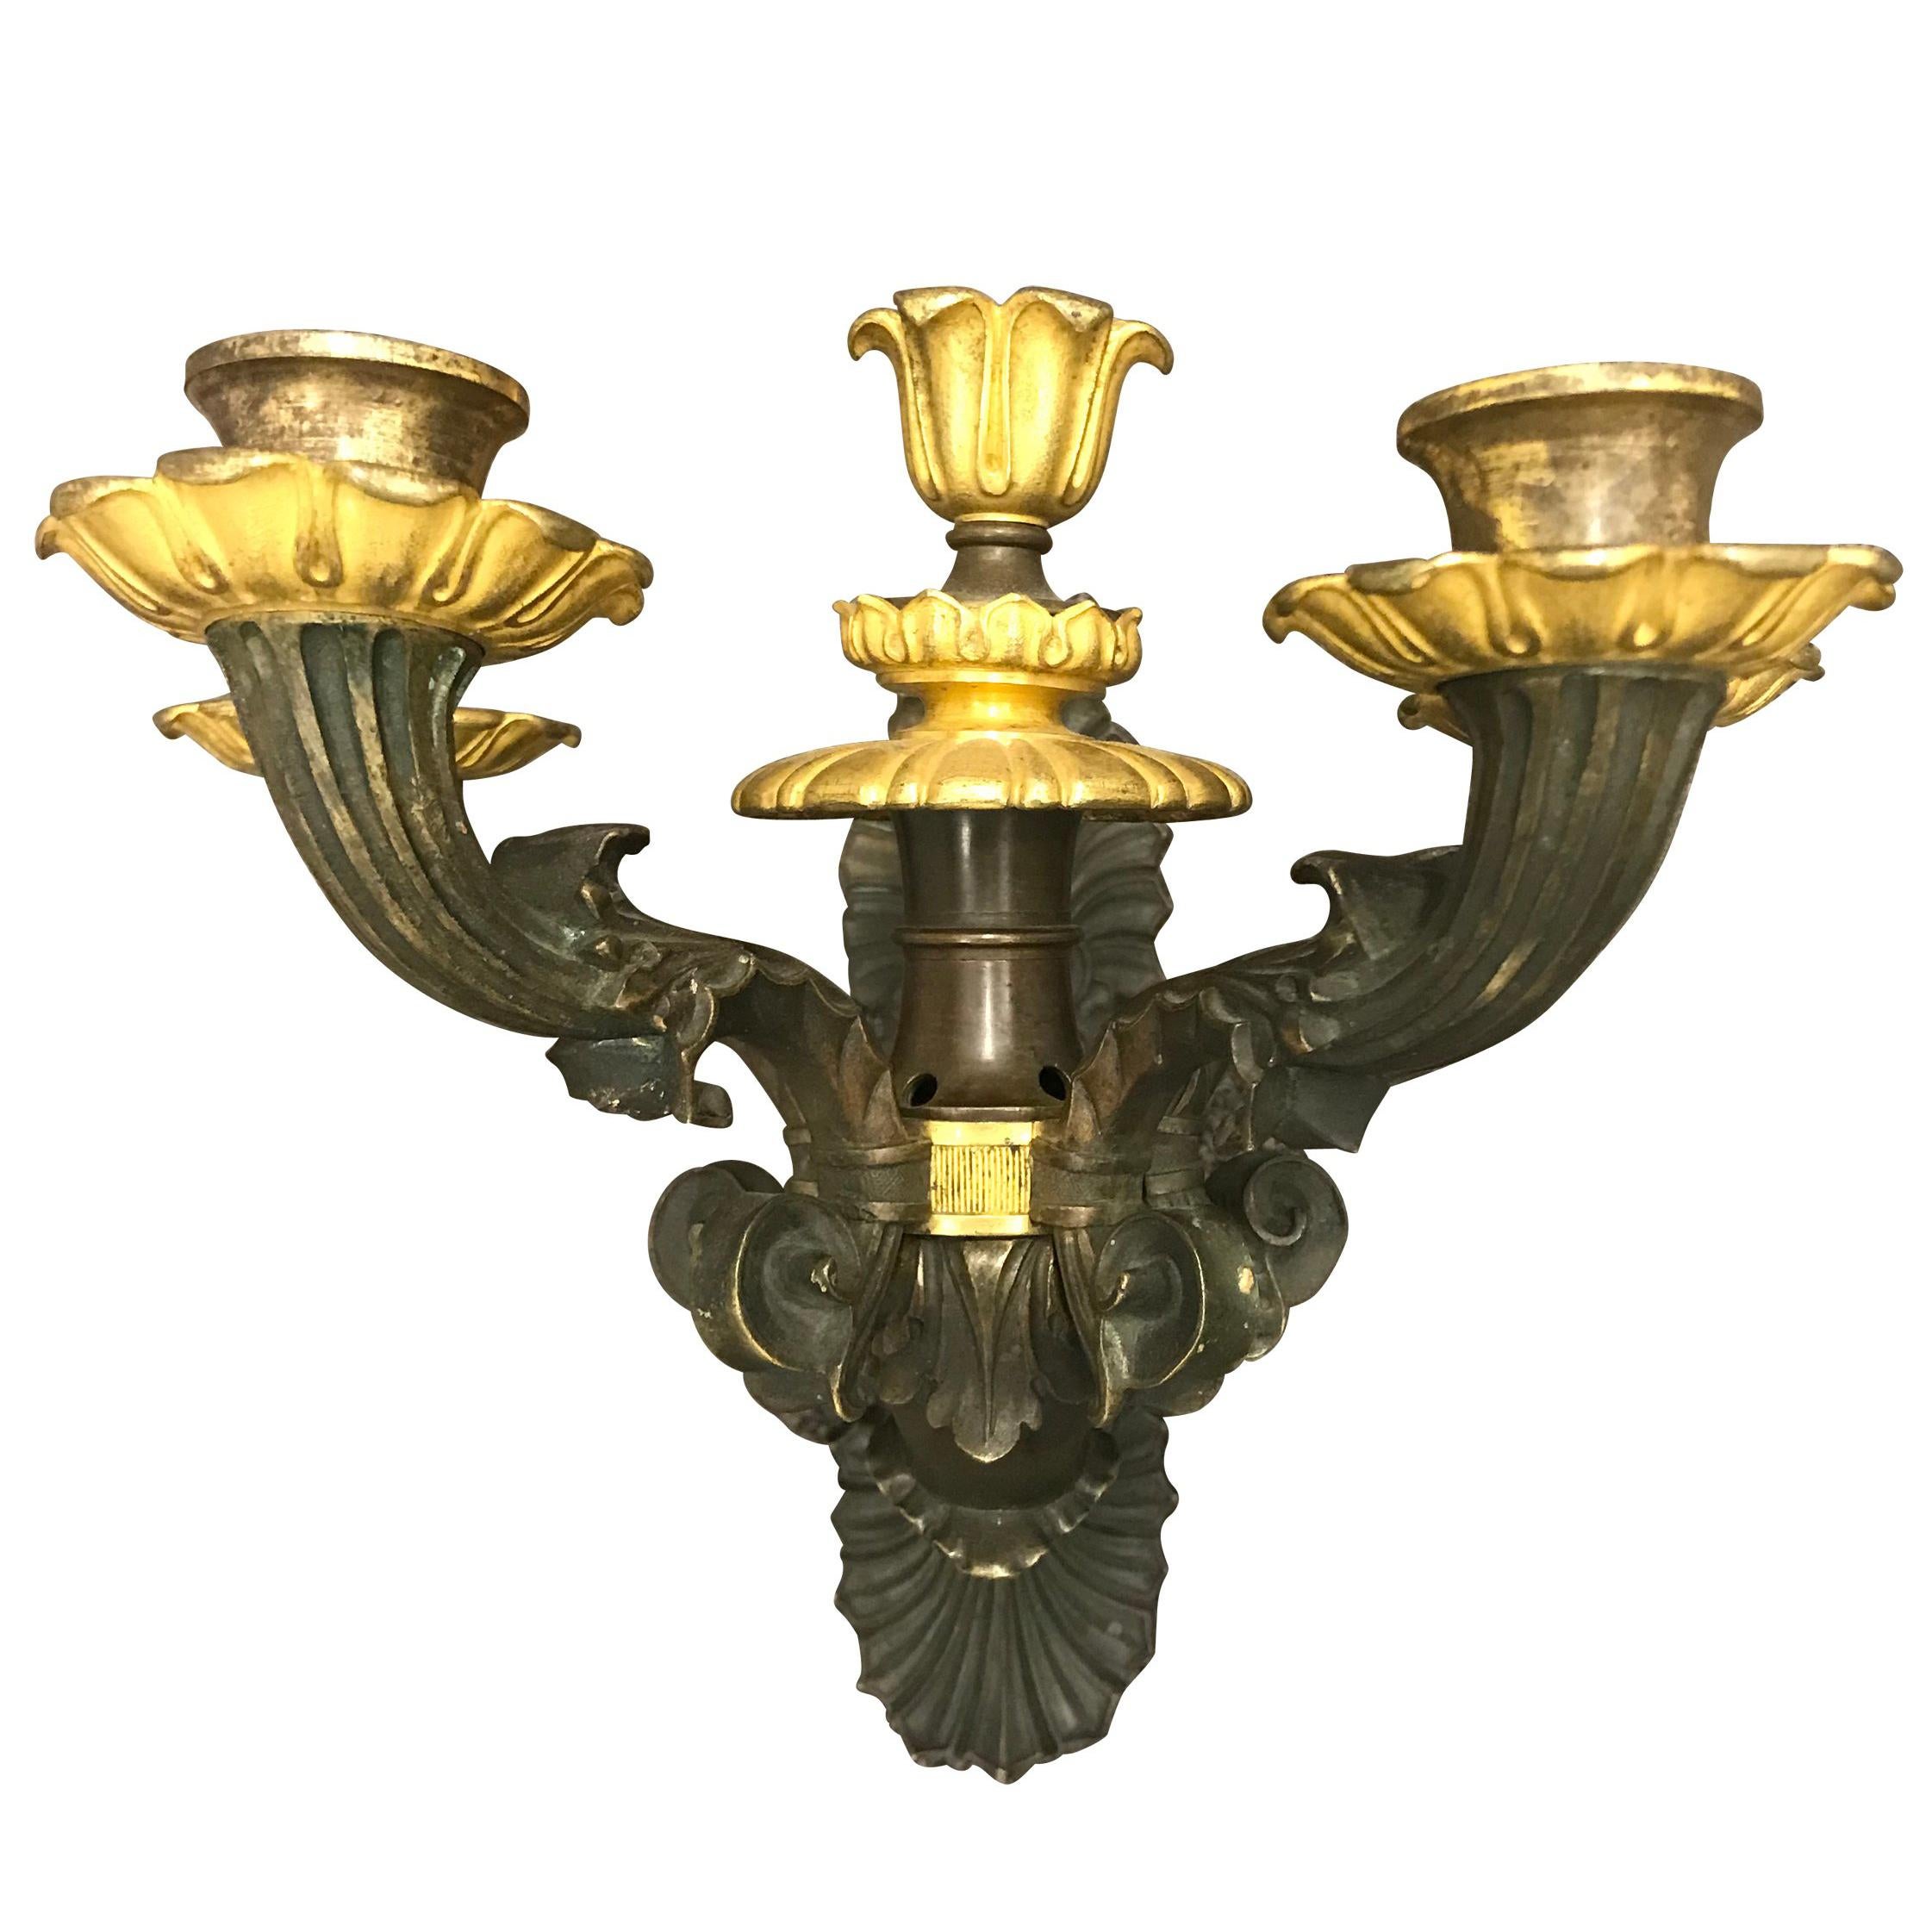 Early 19th Century French Charles X Gilt Bronze Sconce For Sale